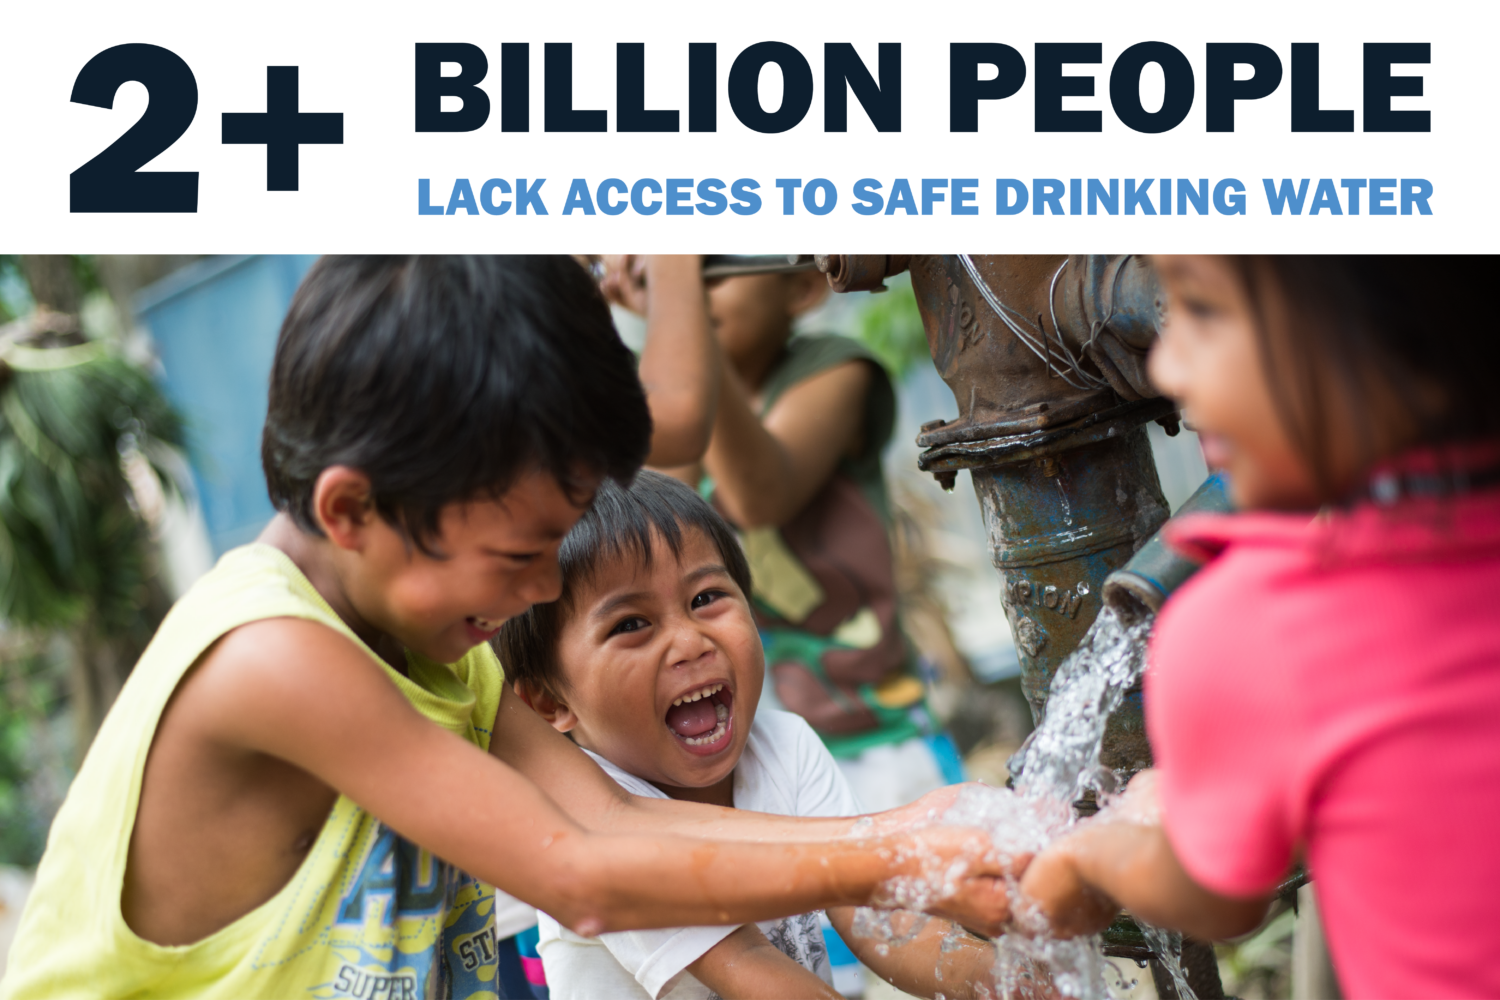 This image shows children laughing as water pours from a well, with the text "2+ Billion People Lack Access to Safe Drinking Water" above the image.